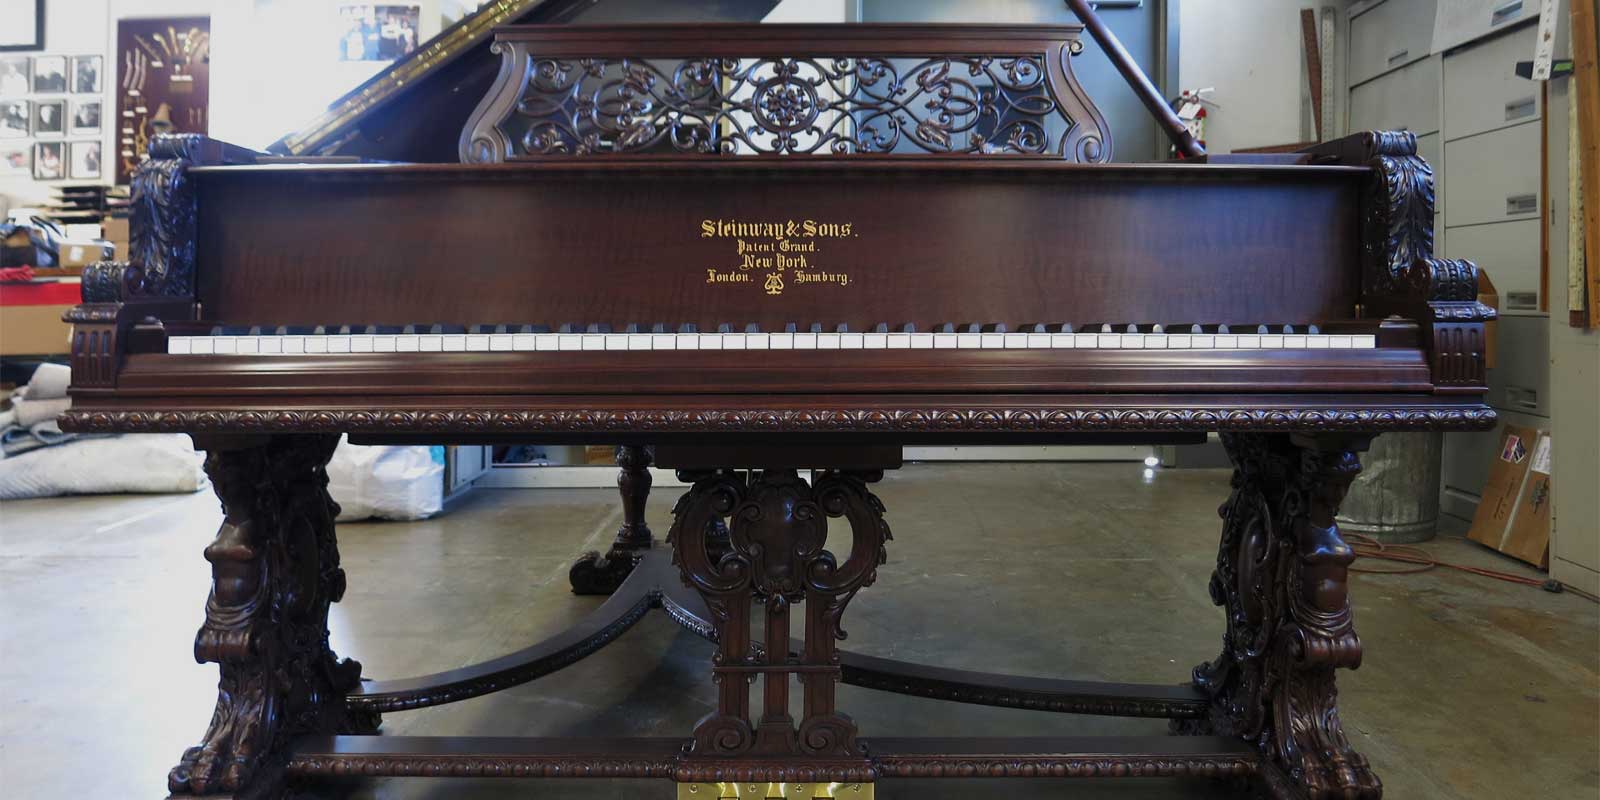 Intricately carved Steinway and Sons grand piano